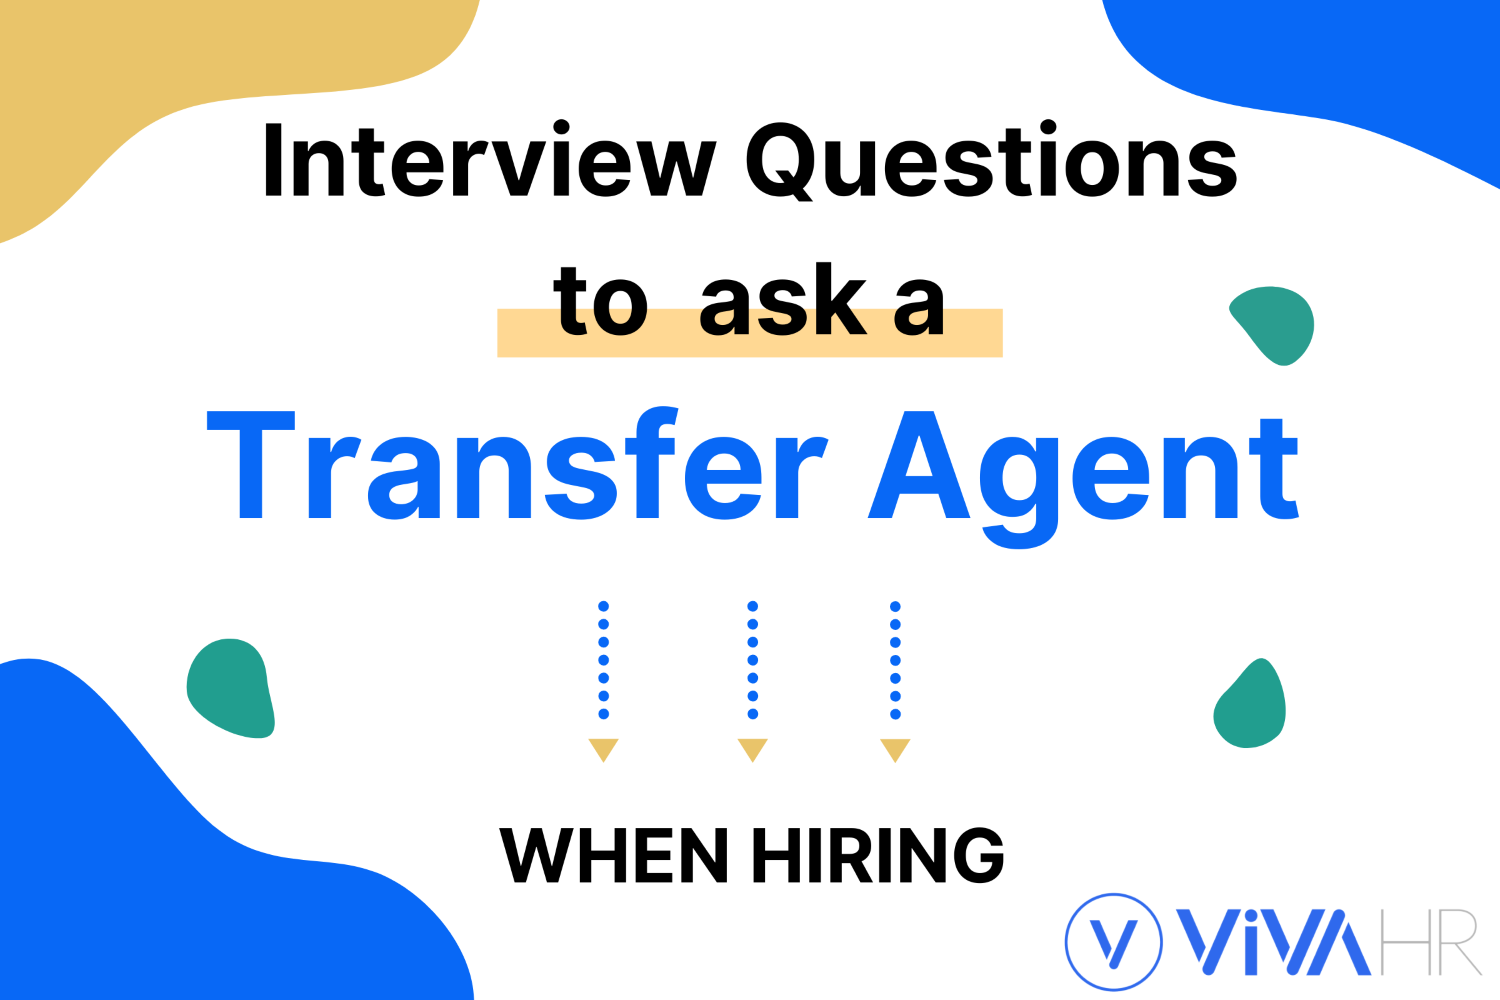 Transfer Agent Interview Questions